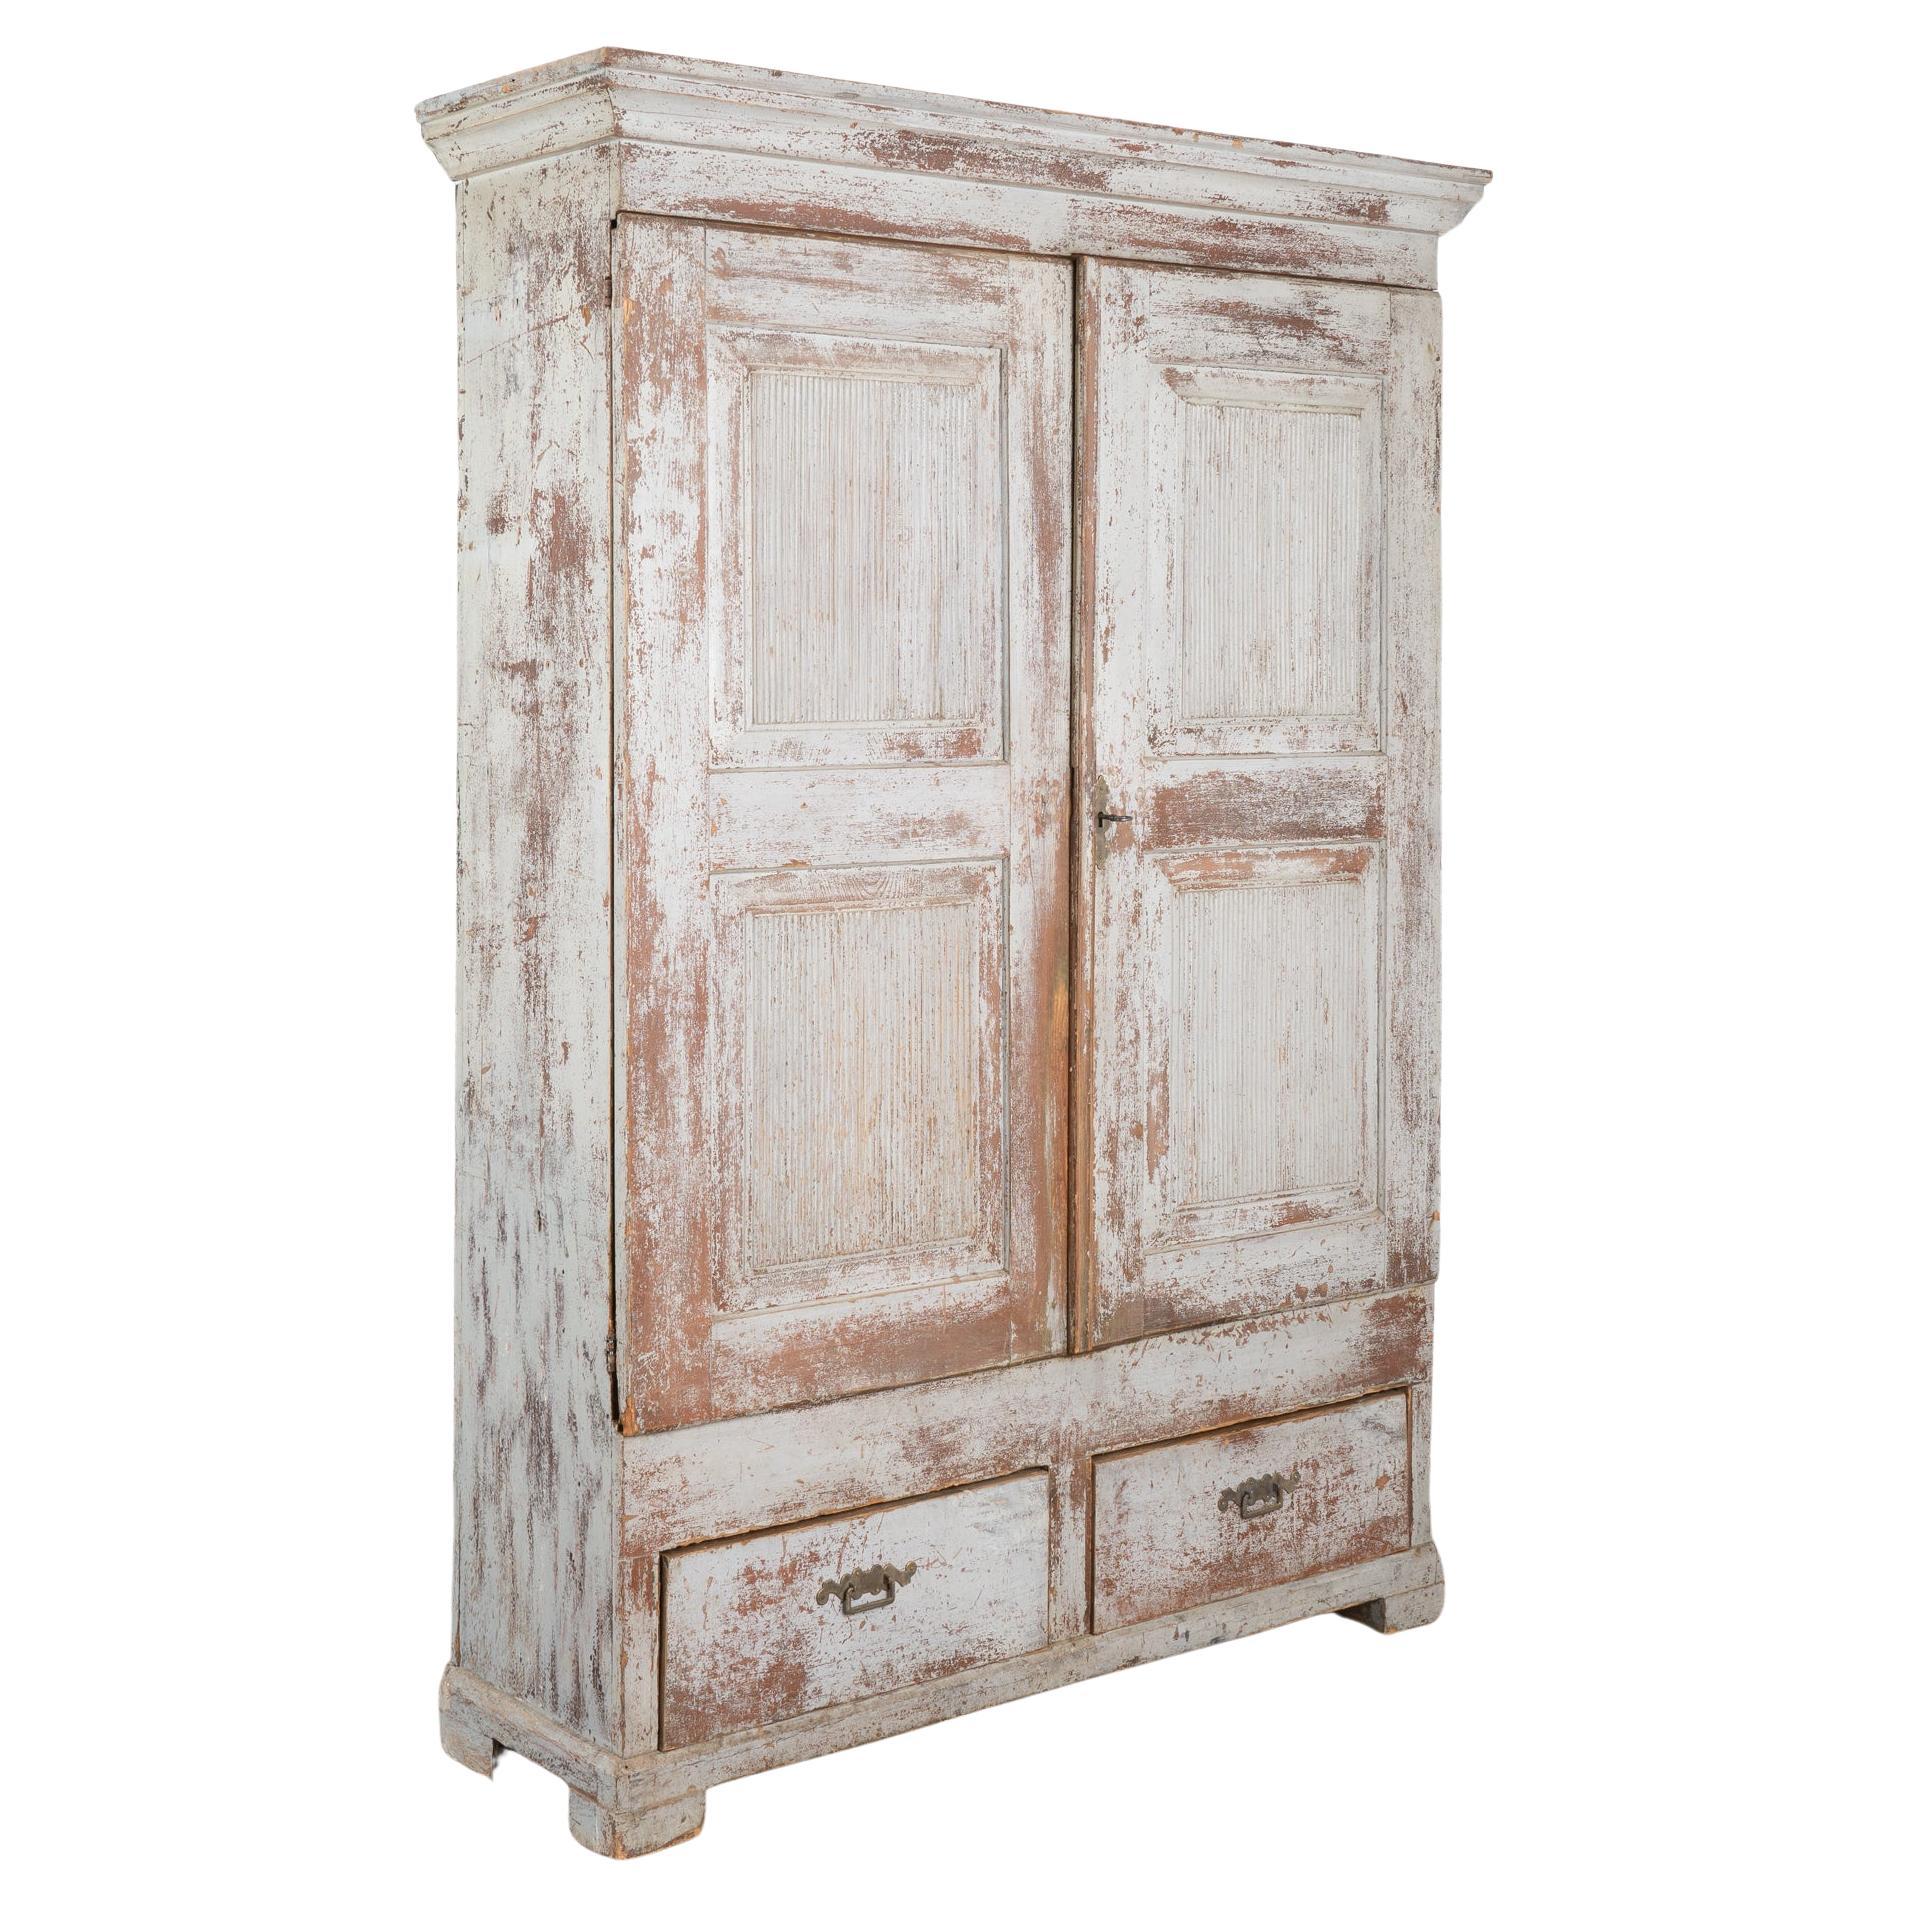 Blue Painted Armoire Cabinet from Sweden, circa 1820 For Sale